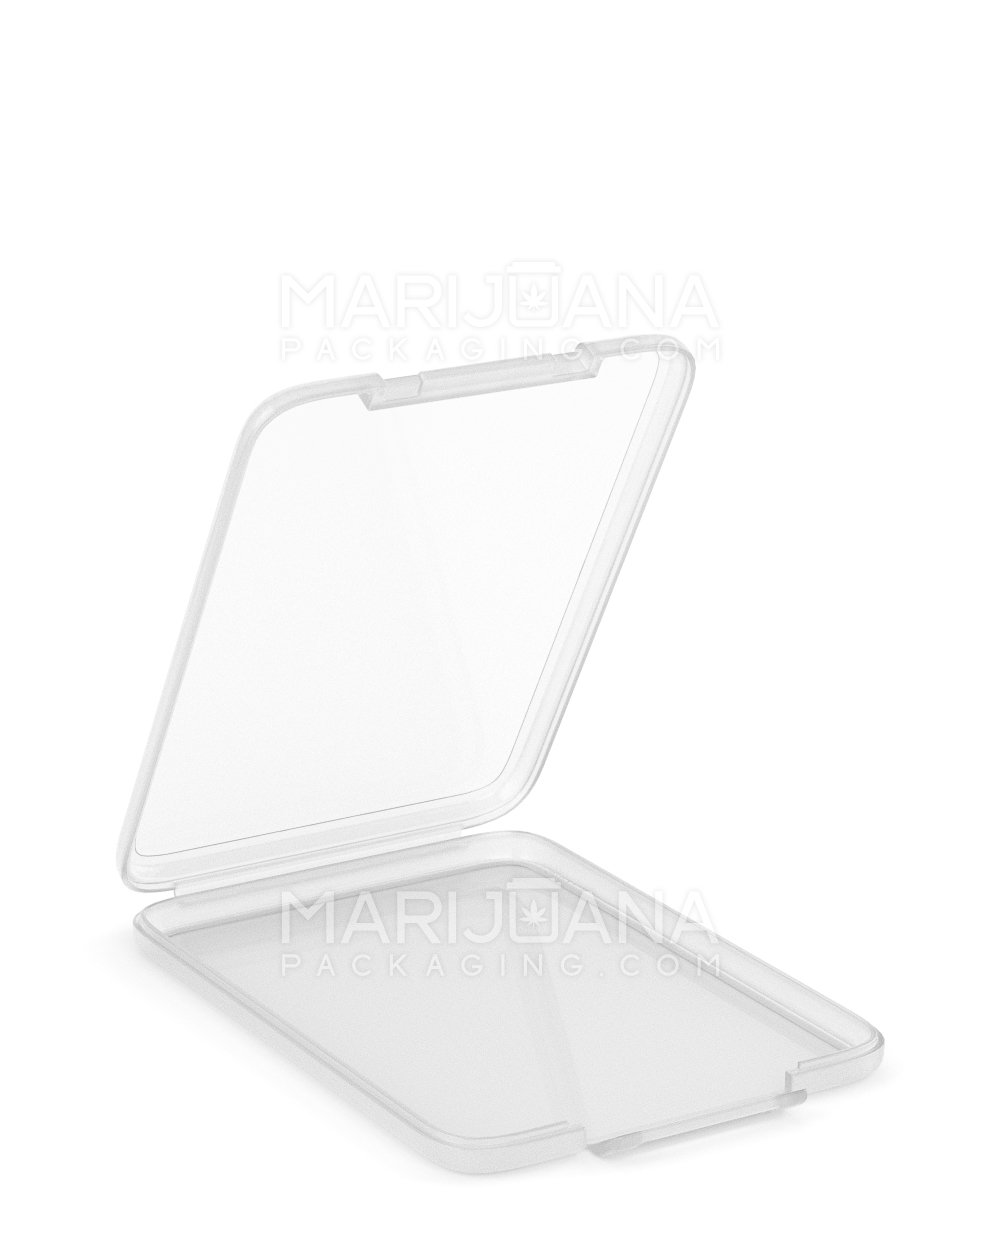 Hinged Lid Slim Shatter Container | 4.5 mm - Clear Plastic | Sample - 1